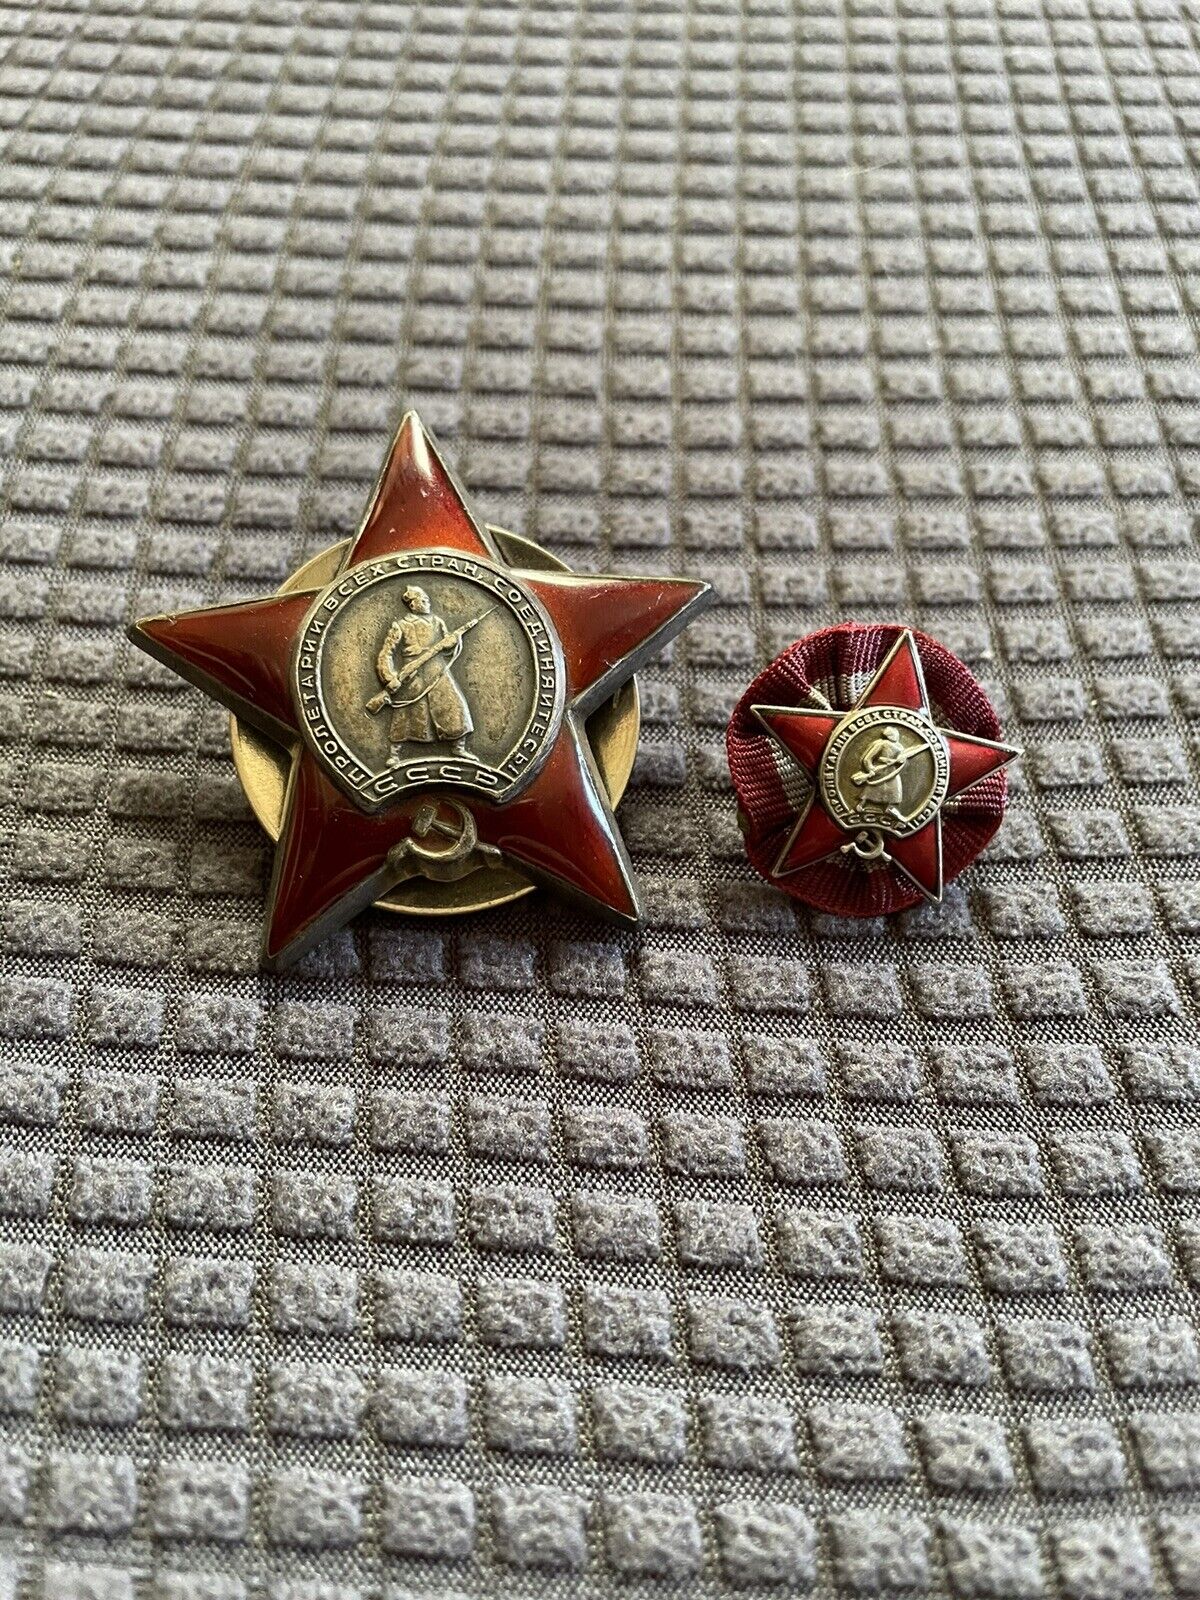 Soviet Order Of The Red Star And Miniature Wwii Ww2 Medal Award